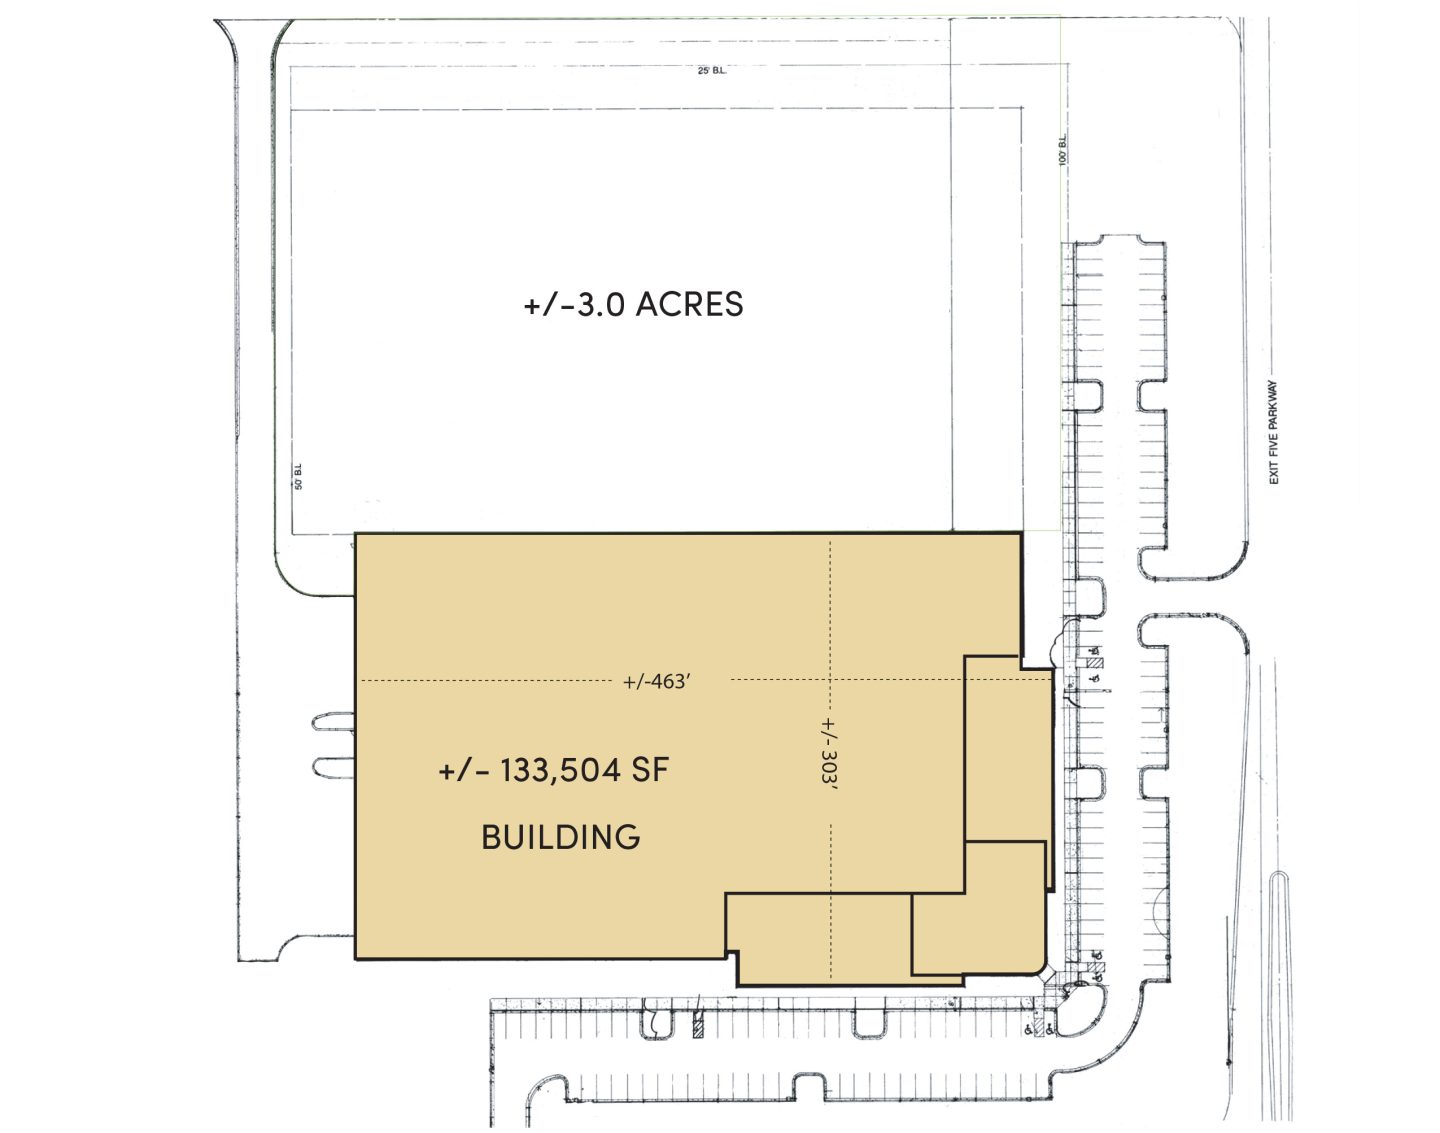 12001 Exit 5 Parkway - Photos and floorplans